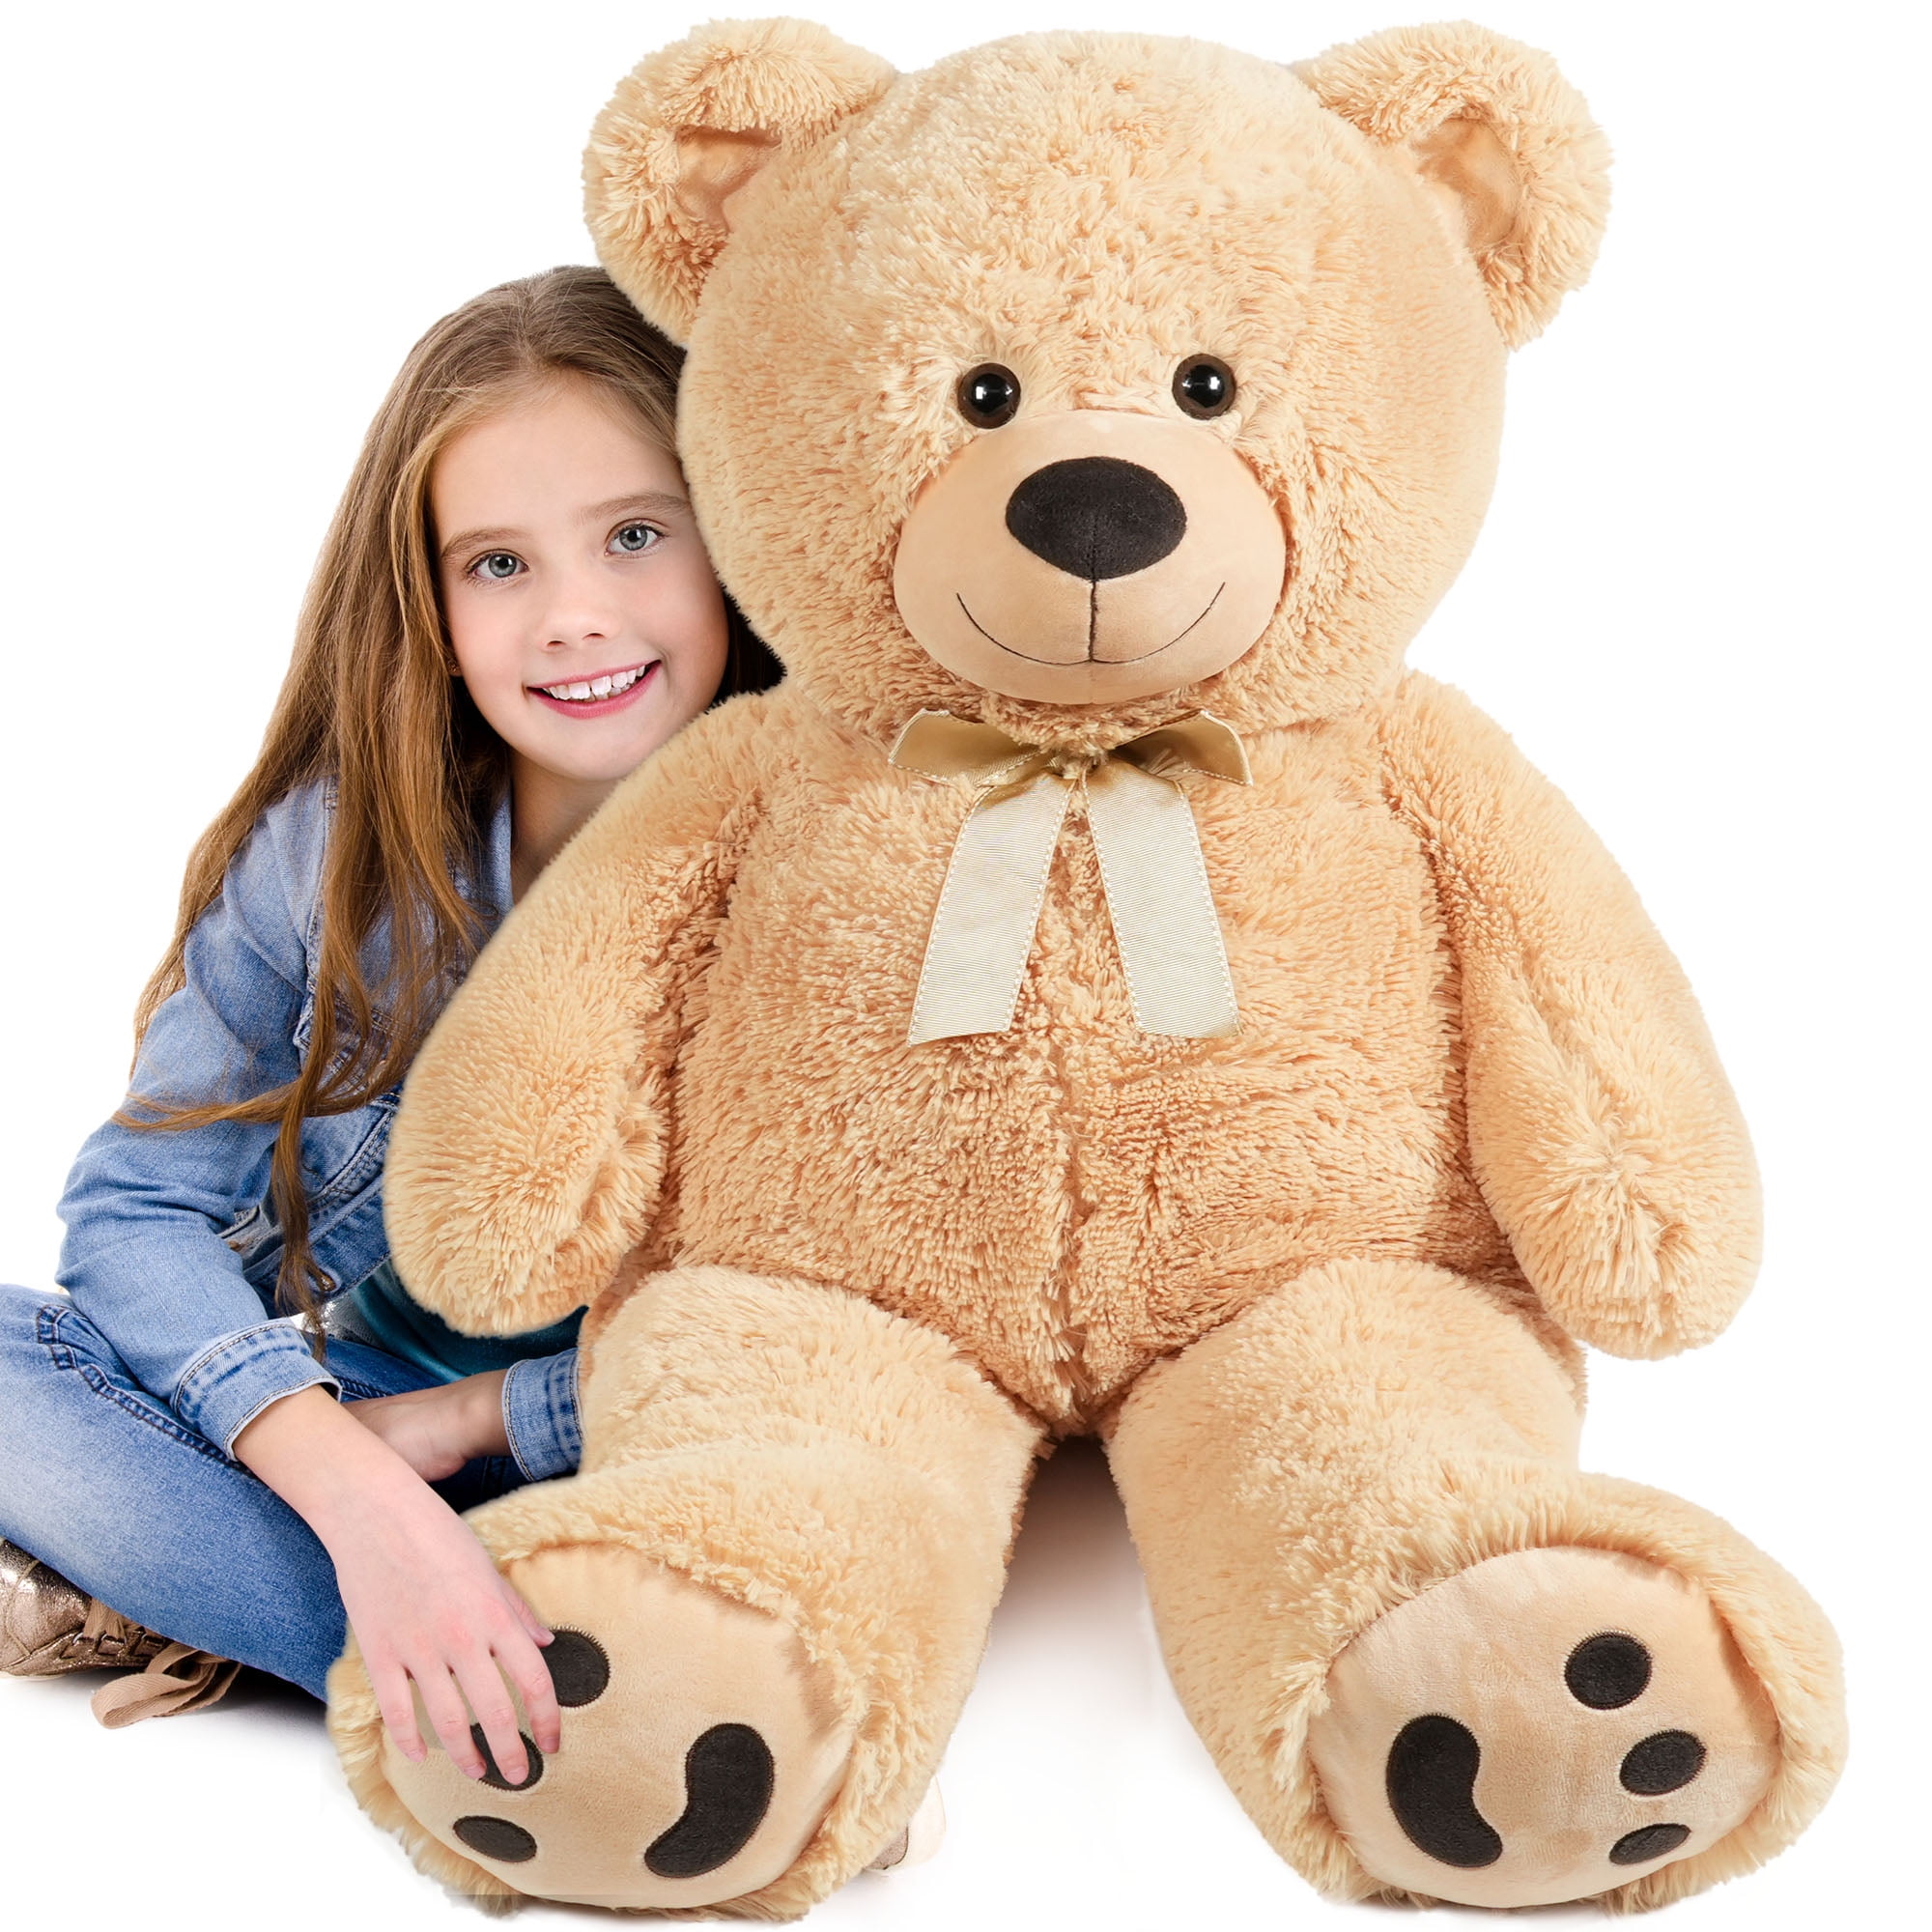 LotFancy Giant Teddy Bear, 39 in Large Stuffed Animal, Big Plush Toy Gift  for Kids Adult Girls